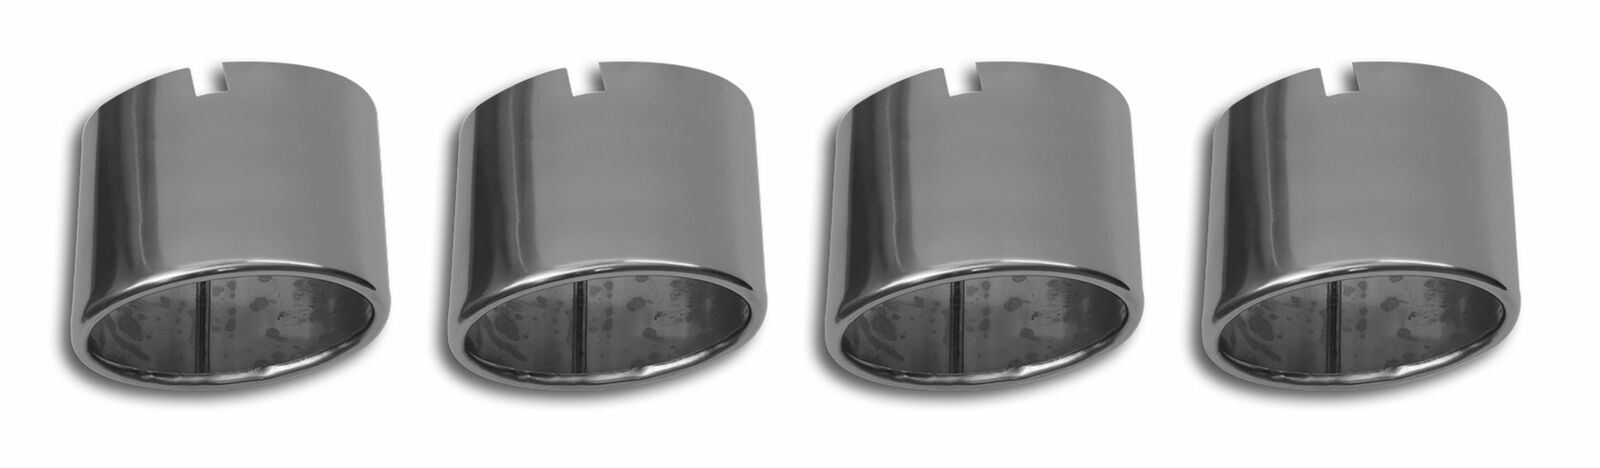 Corvette C5 Exhaust Tips Stock Polished Stainless Steel 4 Piece Set 1997-2000